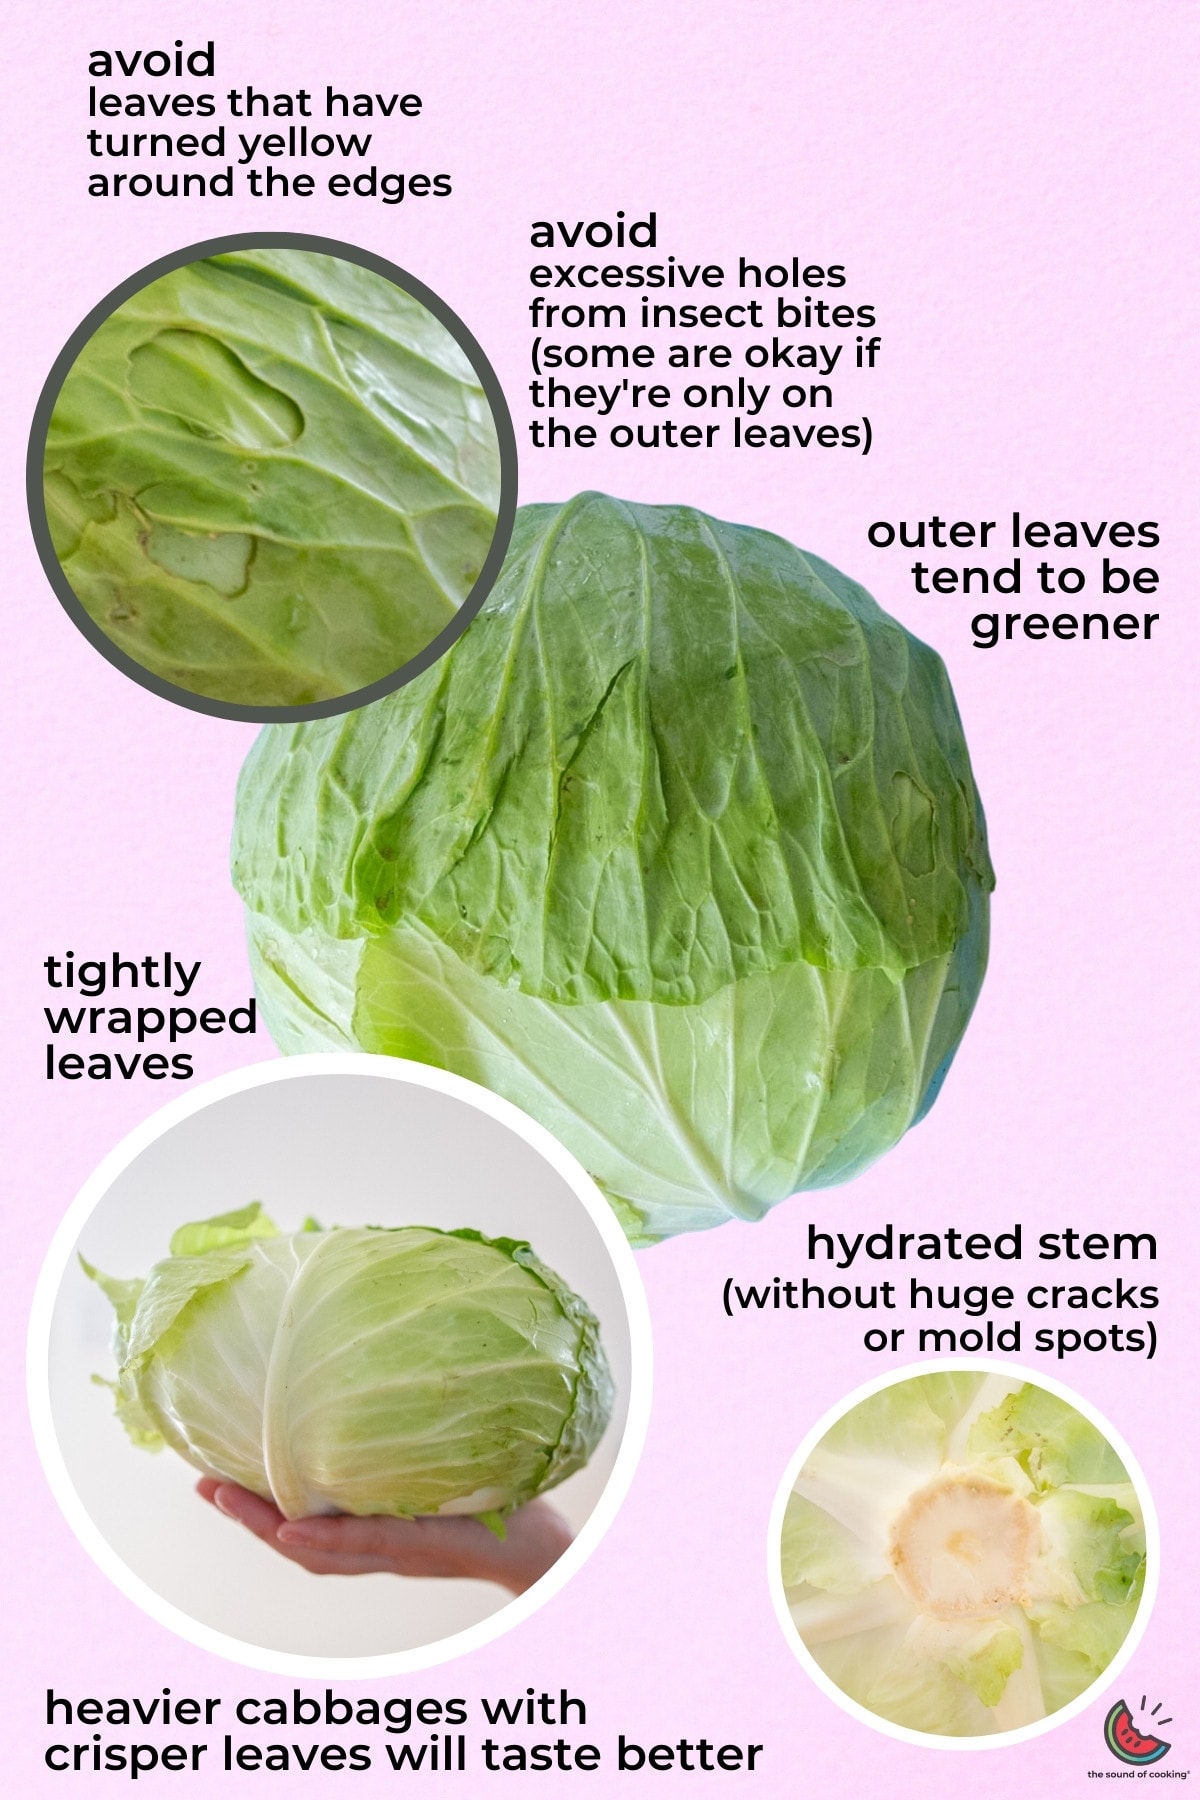 A head of Taiwanese cabbage on a pale pink background with closeup photos and text showing visual cues to look for (tightly wrapped leaves; outer leaves tend to be greener; hydrated stem without huge cracks or mold spots; heavier cabbages with crisper leaves will taste better), as well as what to avoid (leaves that have turned yellow around the edges; excessive holes from insect bites).